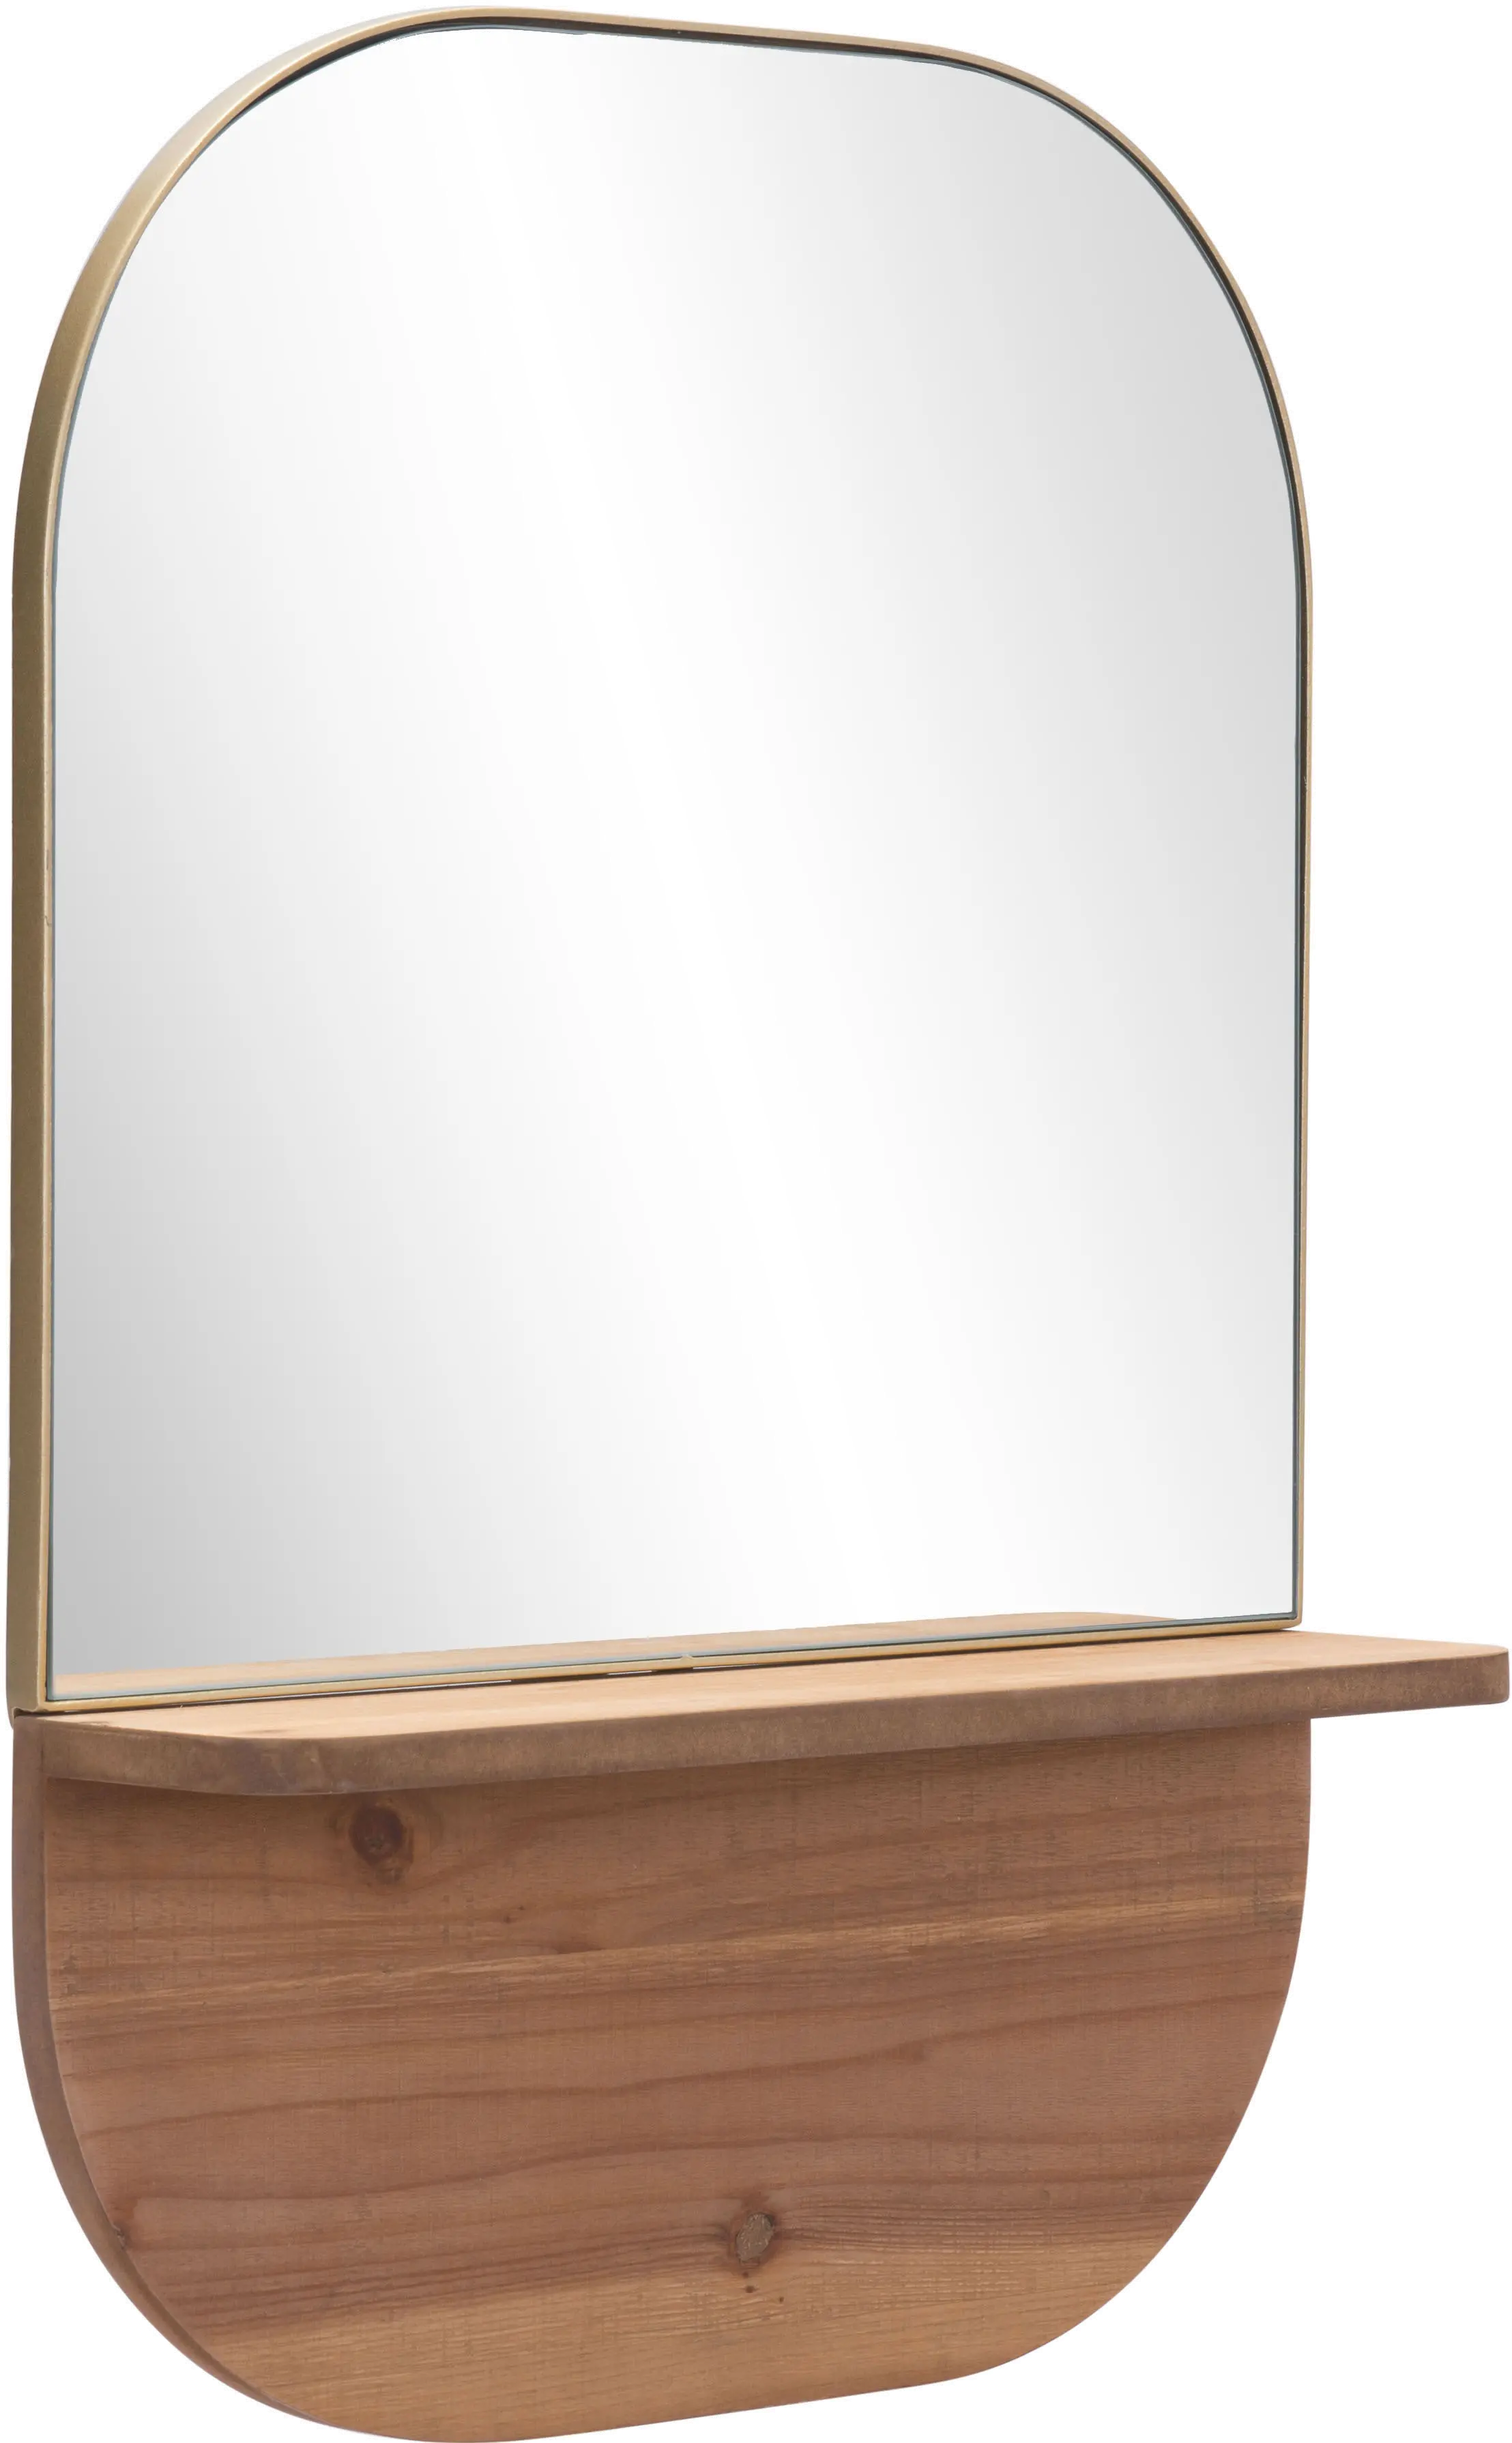 Gold and Brown Wood Shelf Mirror - Meridian